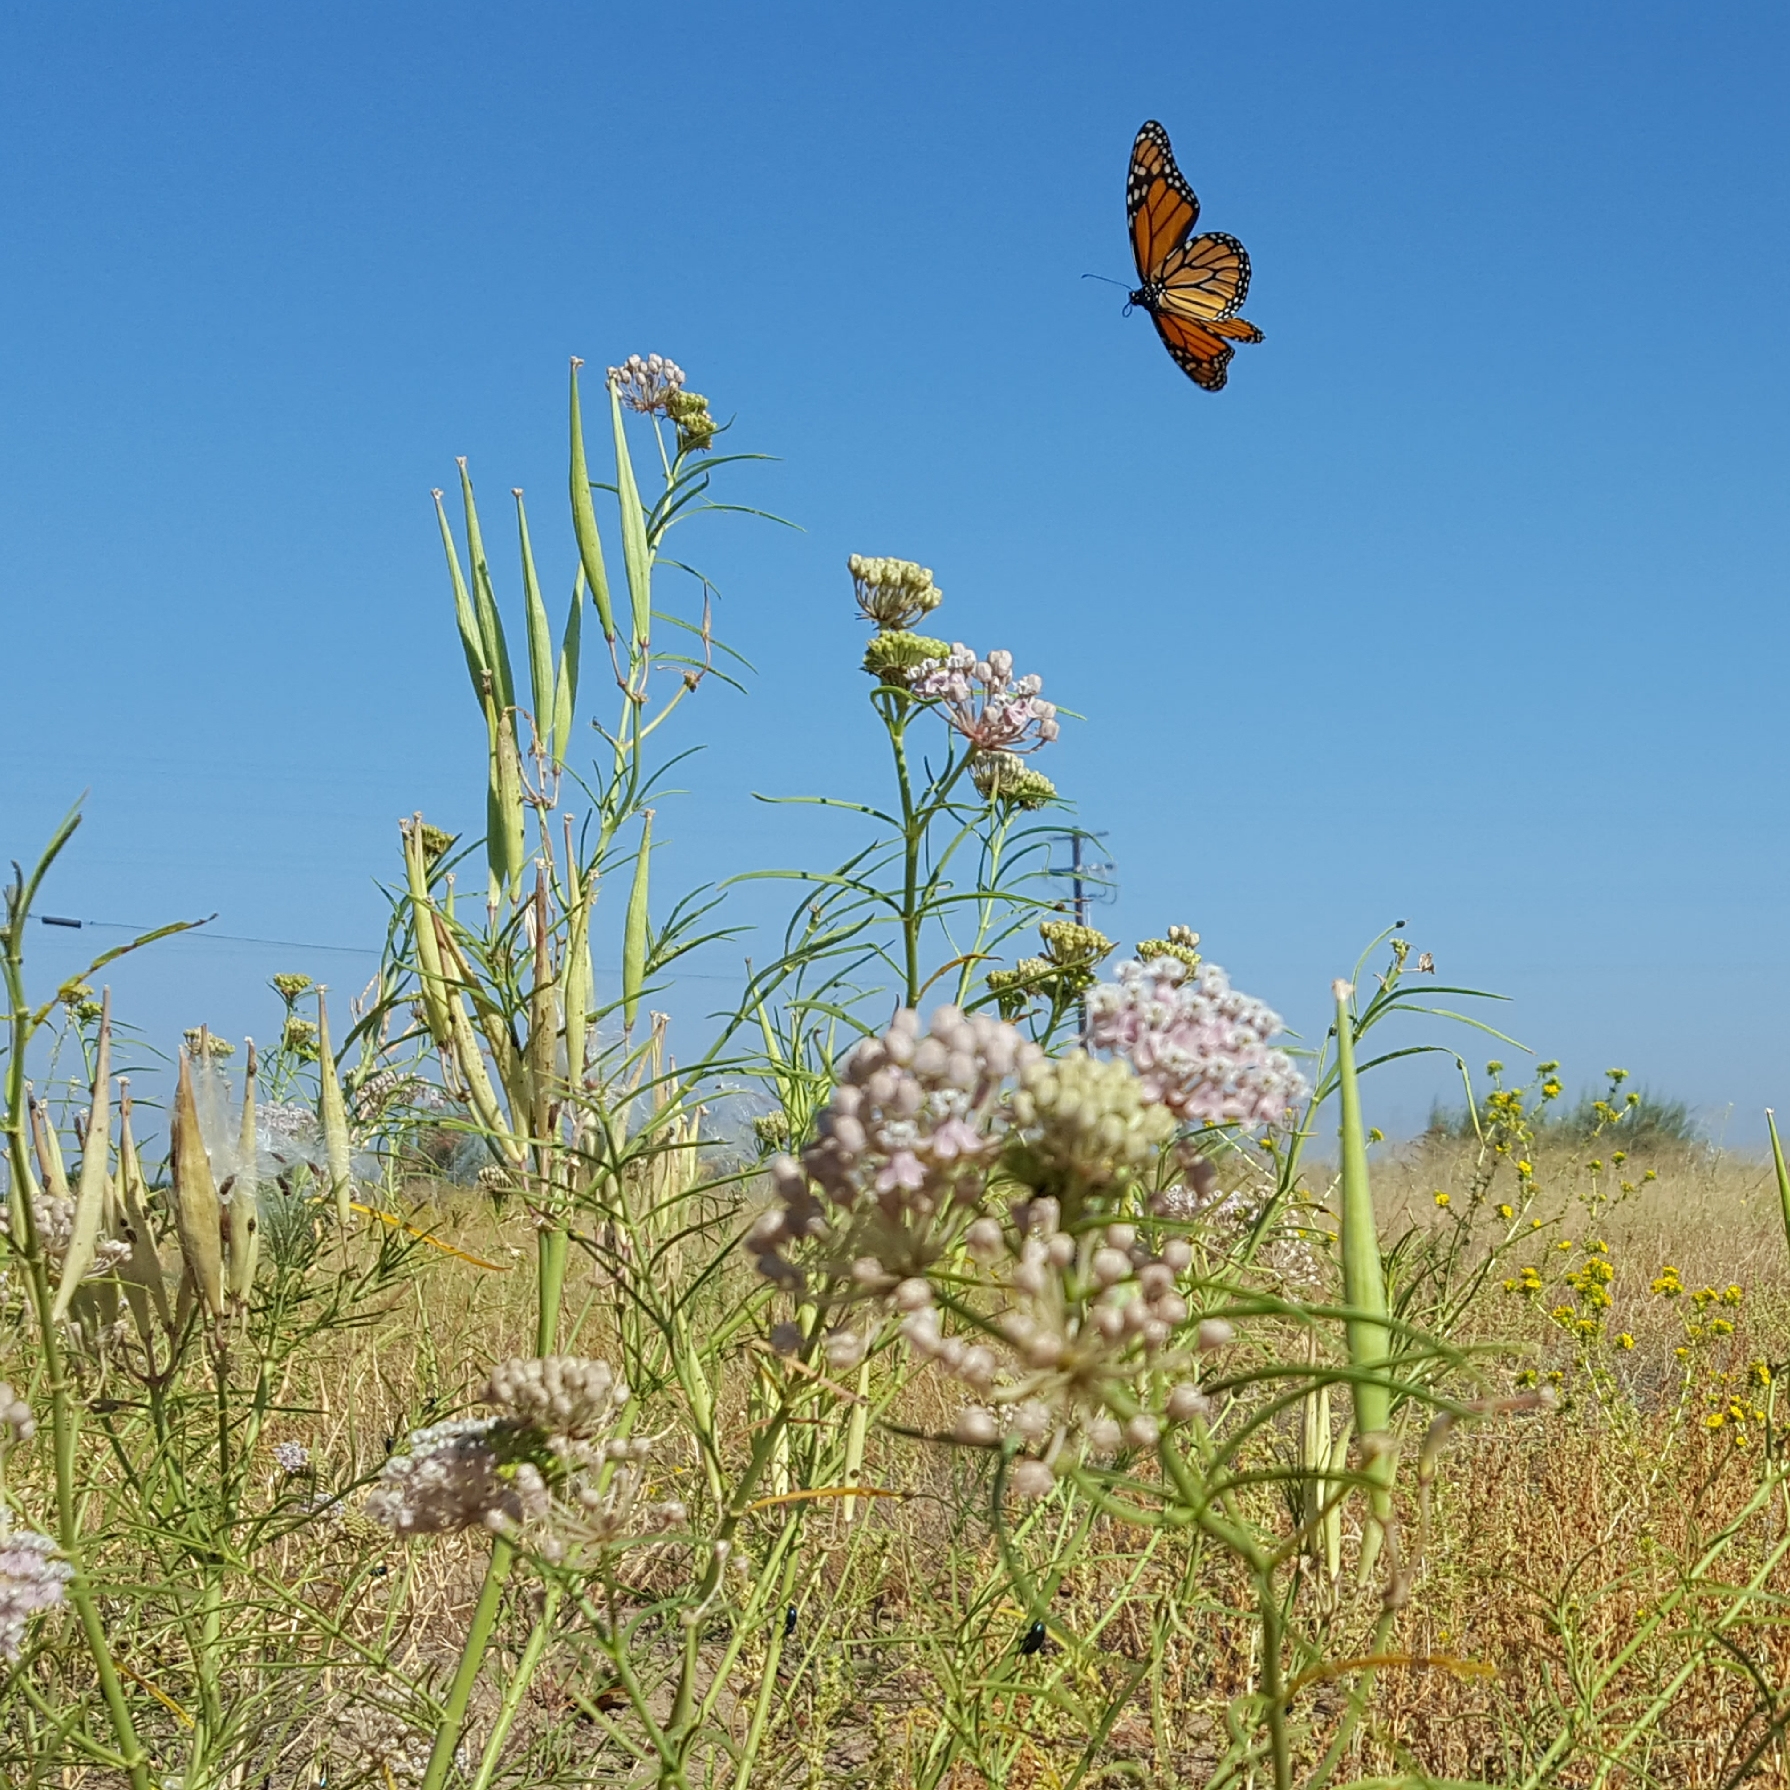 A monarch soars above pink milkweed in an arid landscape.